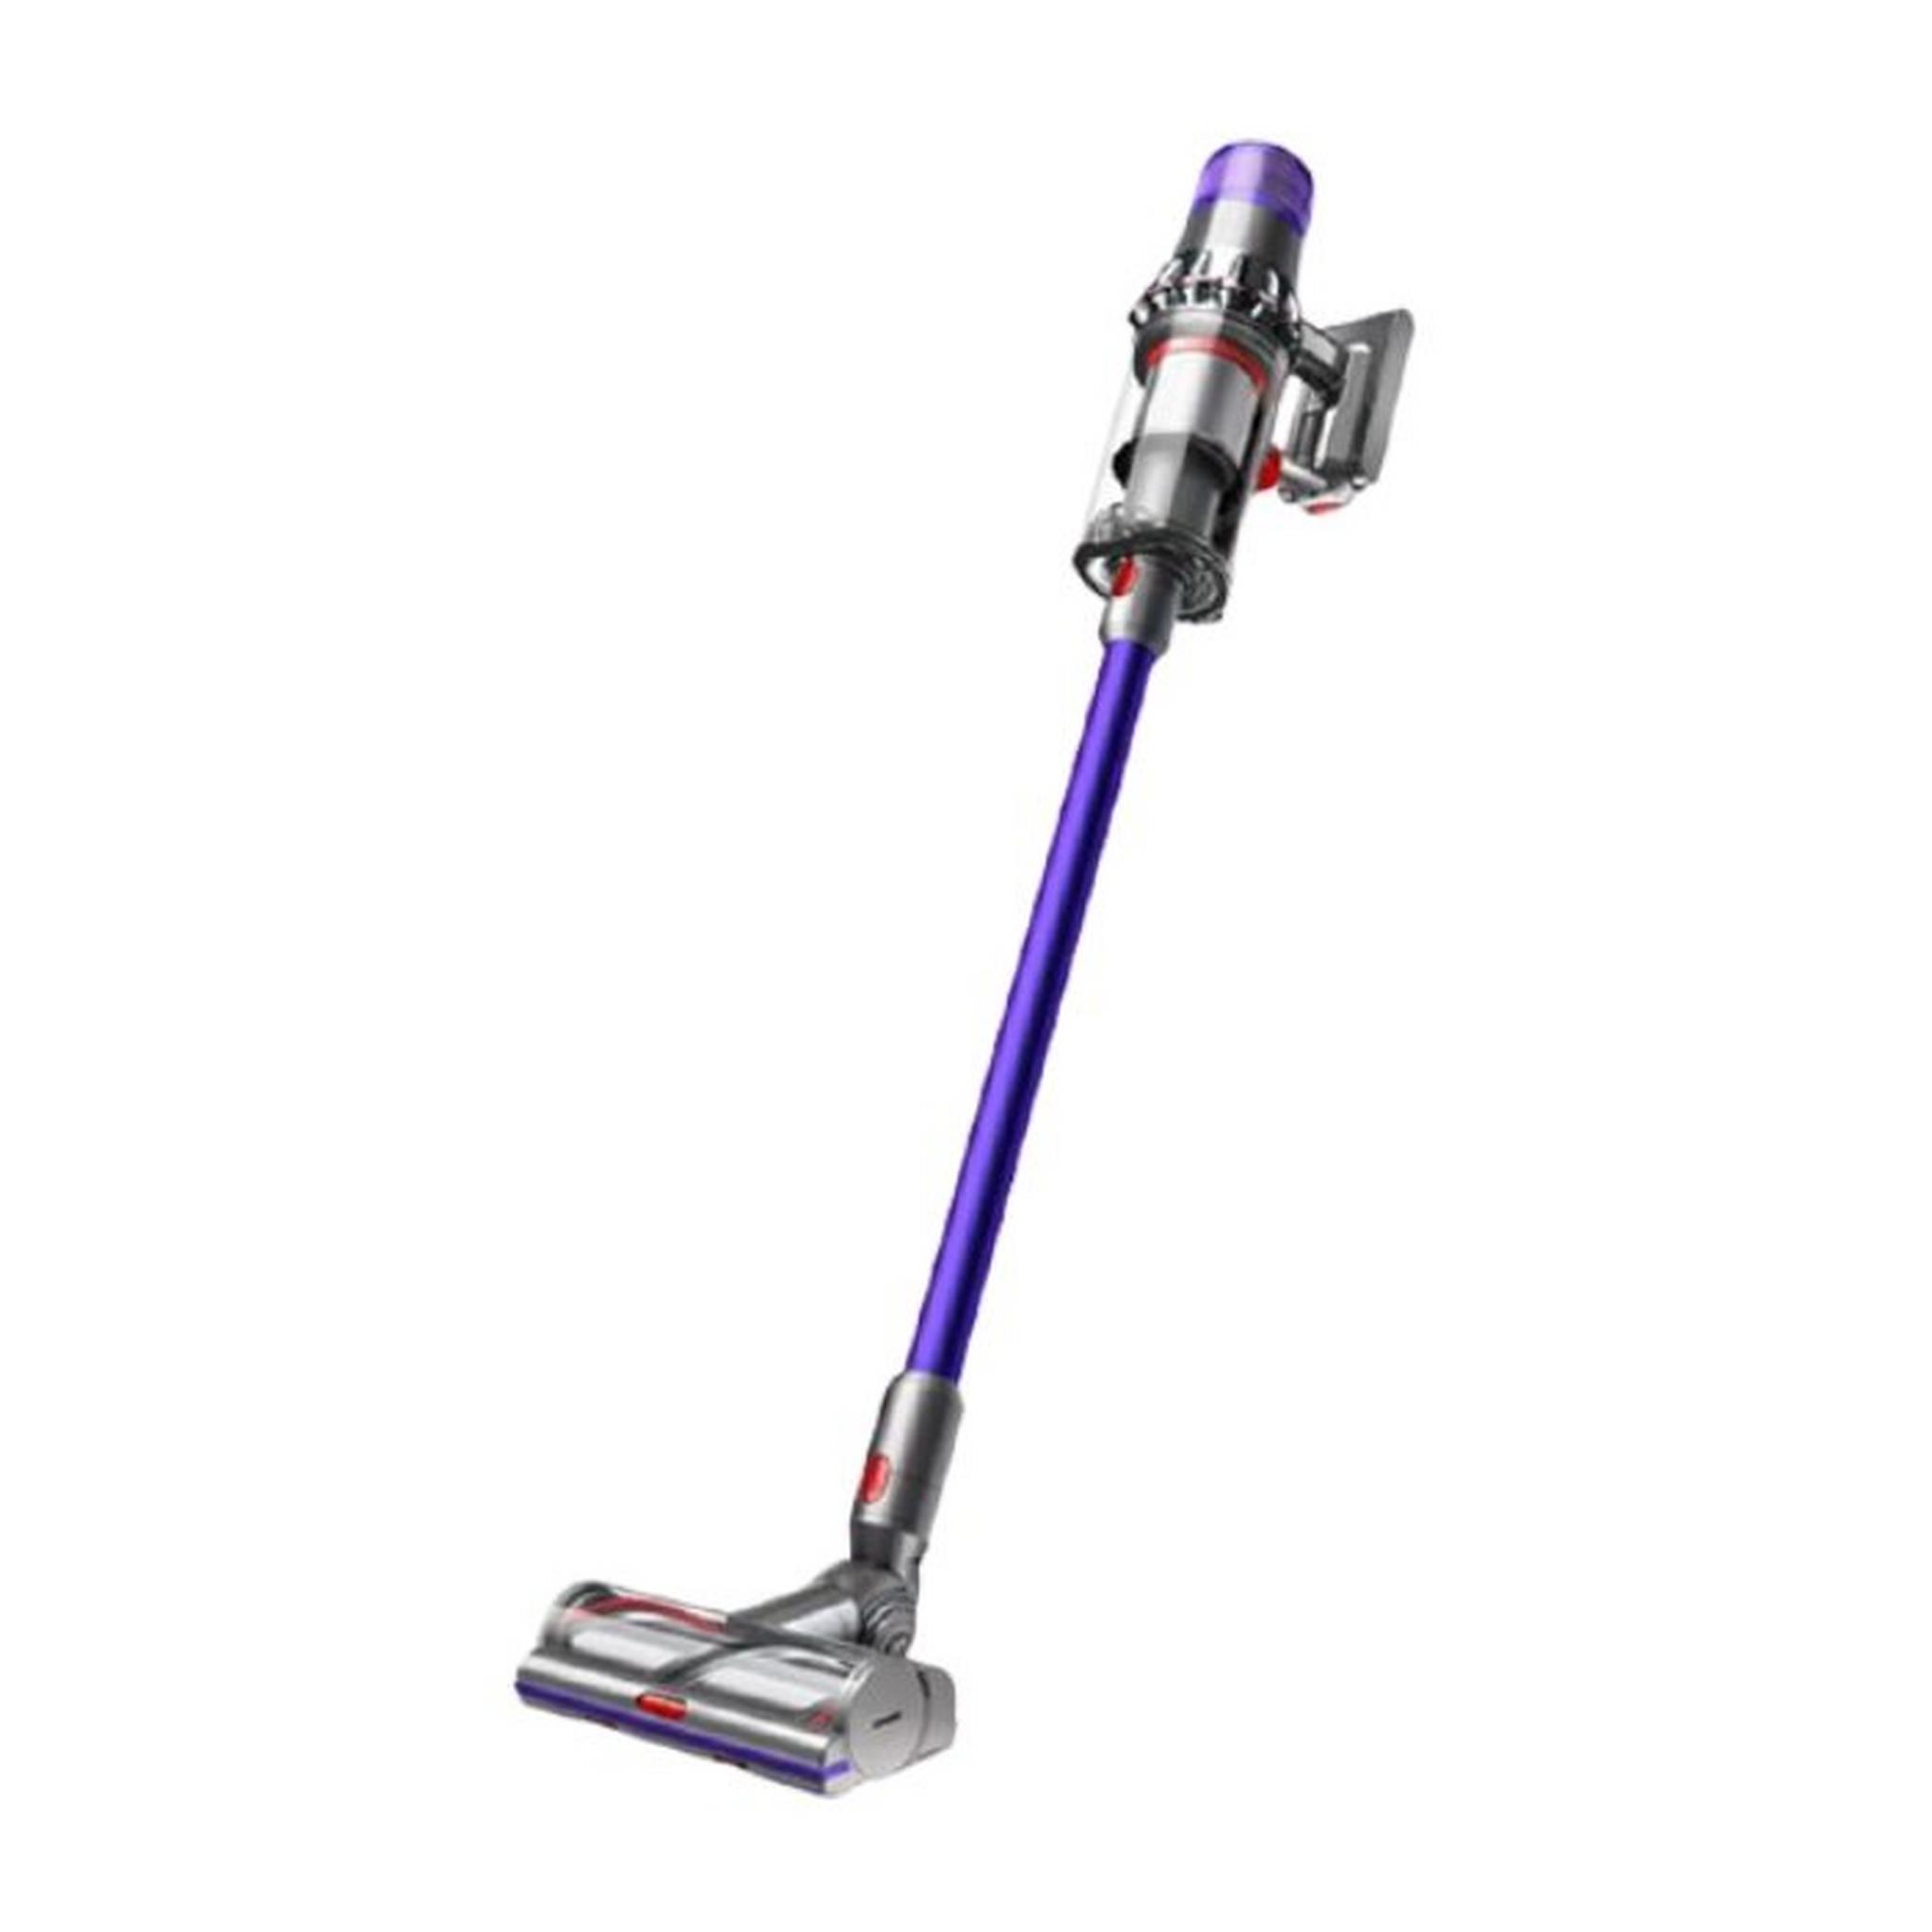 Dyson V11 Absolute Cordless Vacuum Cleaner, V11 TORQUE - Blue